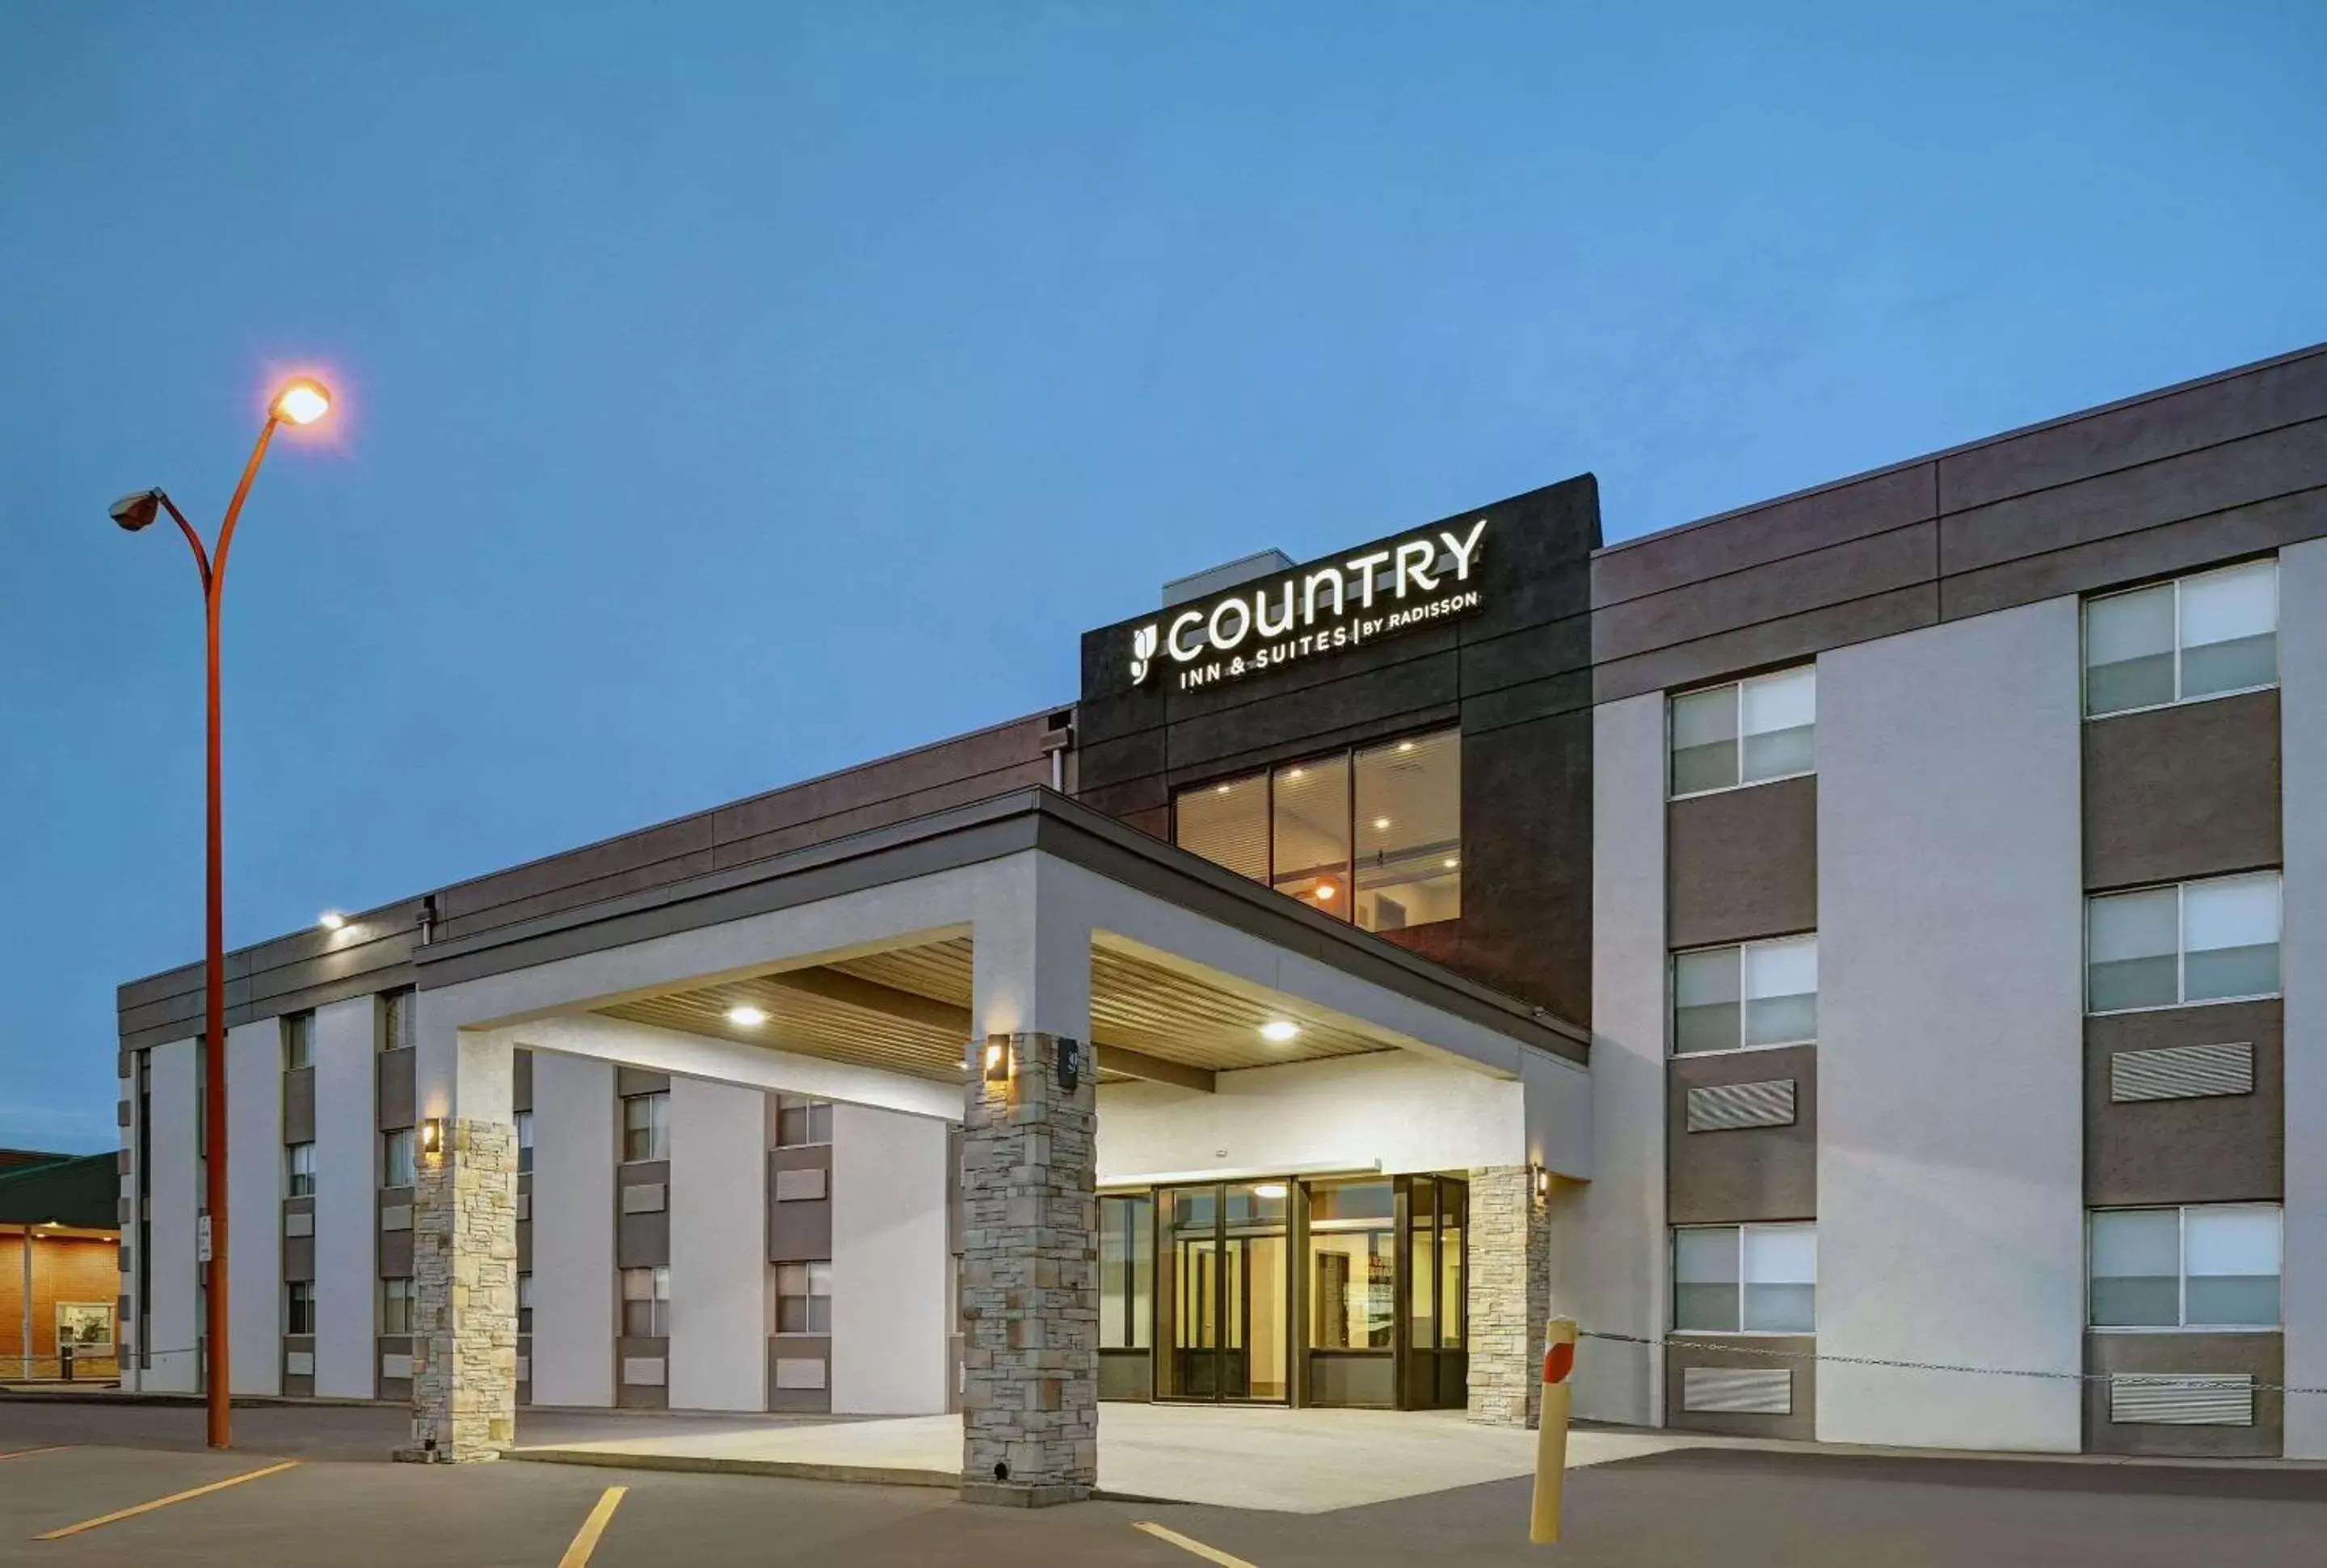 Property Building in Country Inn & Suites by Radisson, Pierre, SD